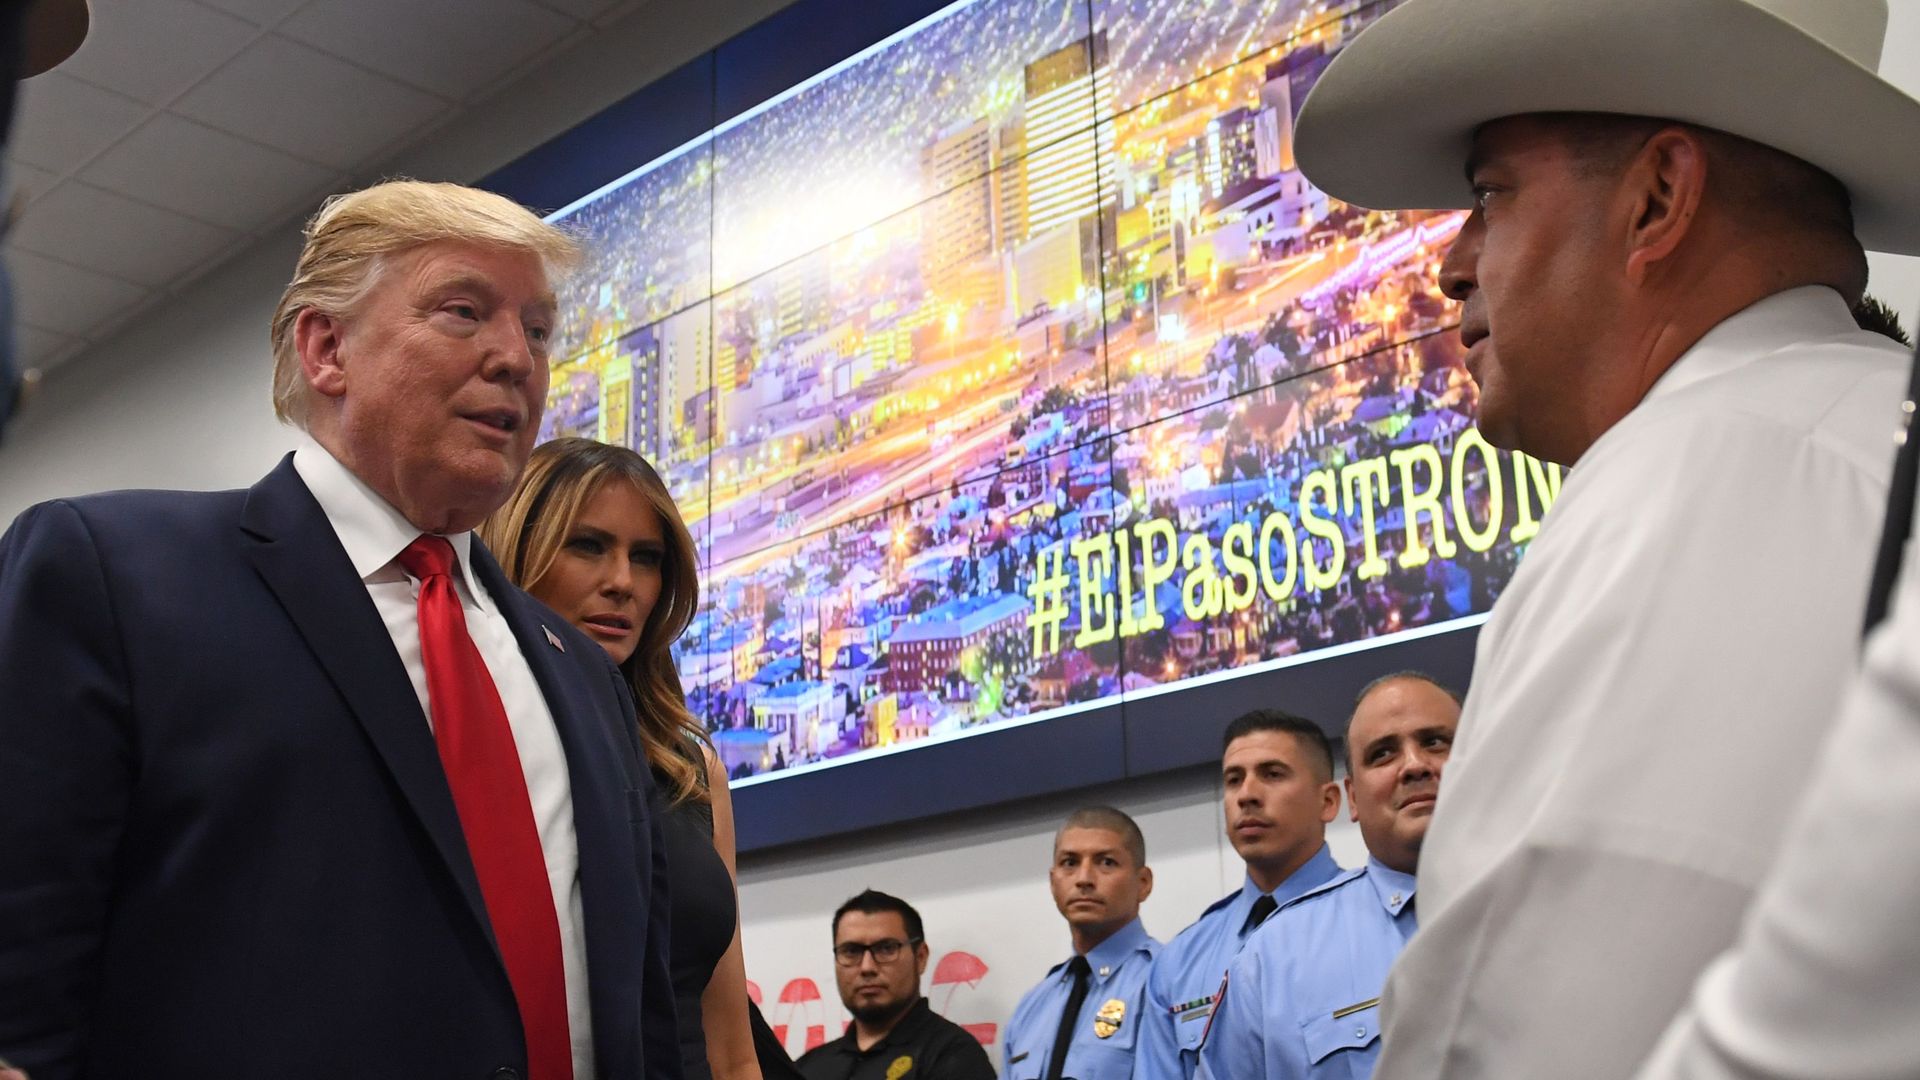 US President Donald Trump and First Lady Melania Trump greet first responders as he visits El Paso Regional Communications Center in El Paso